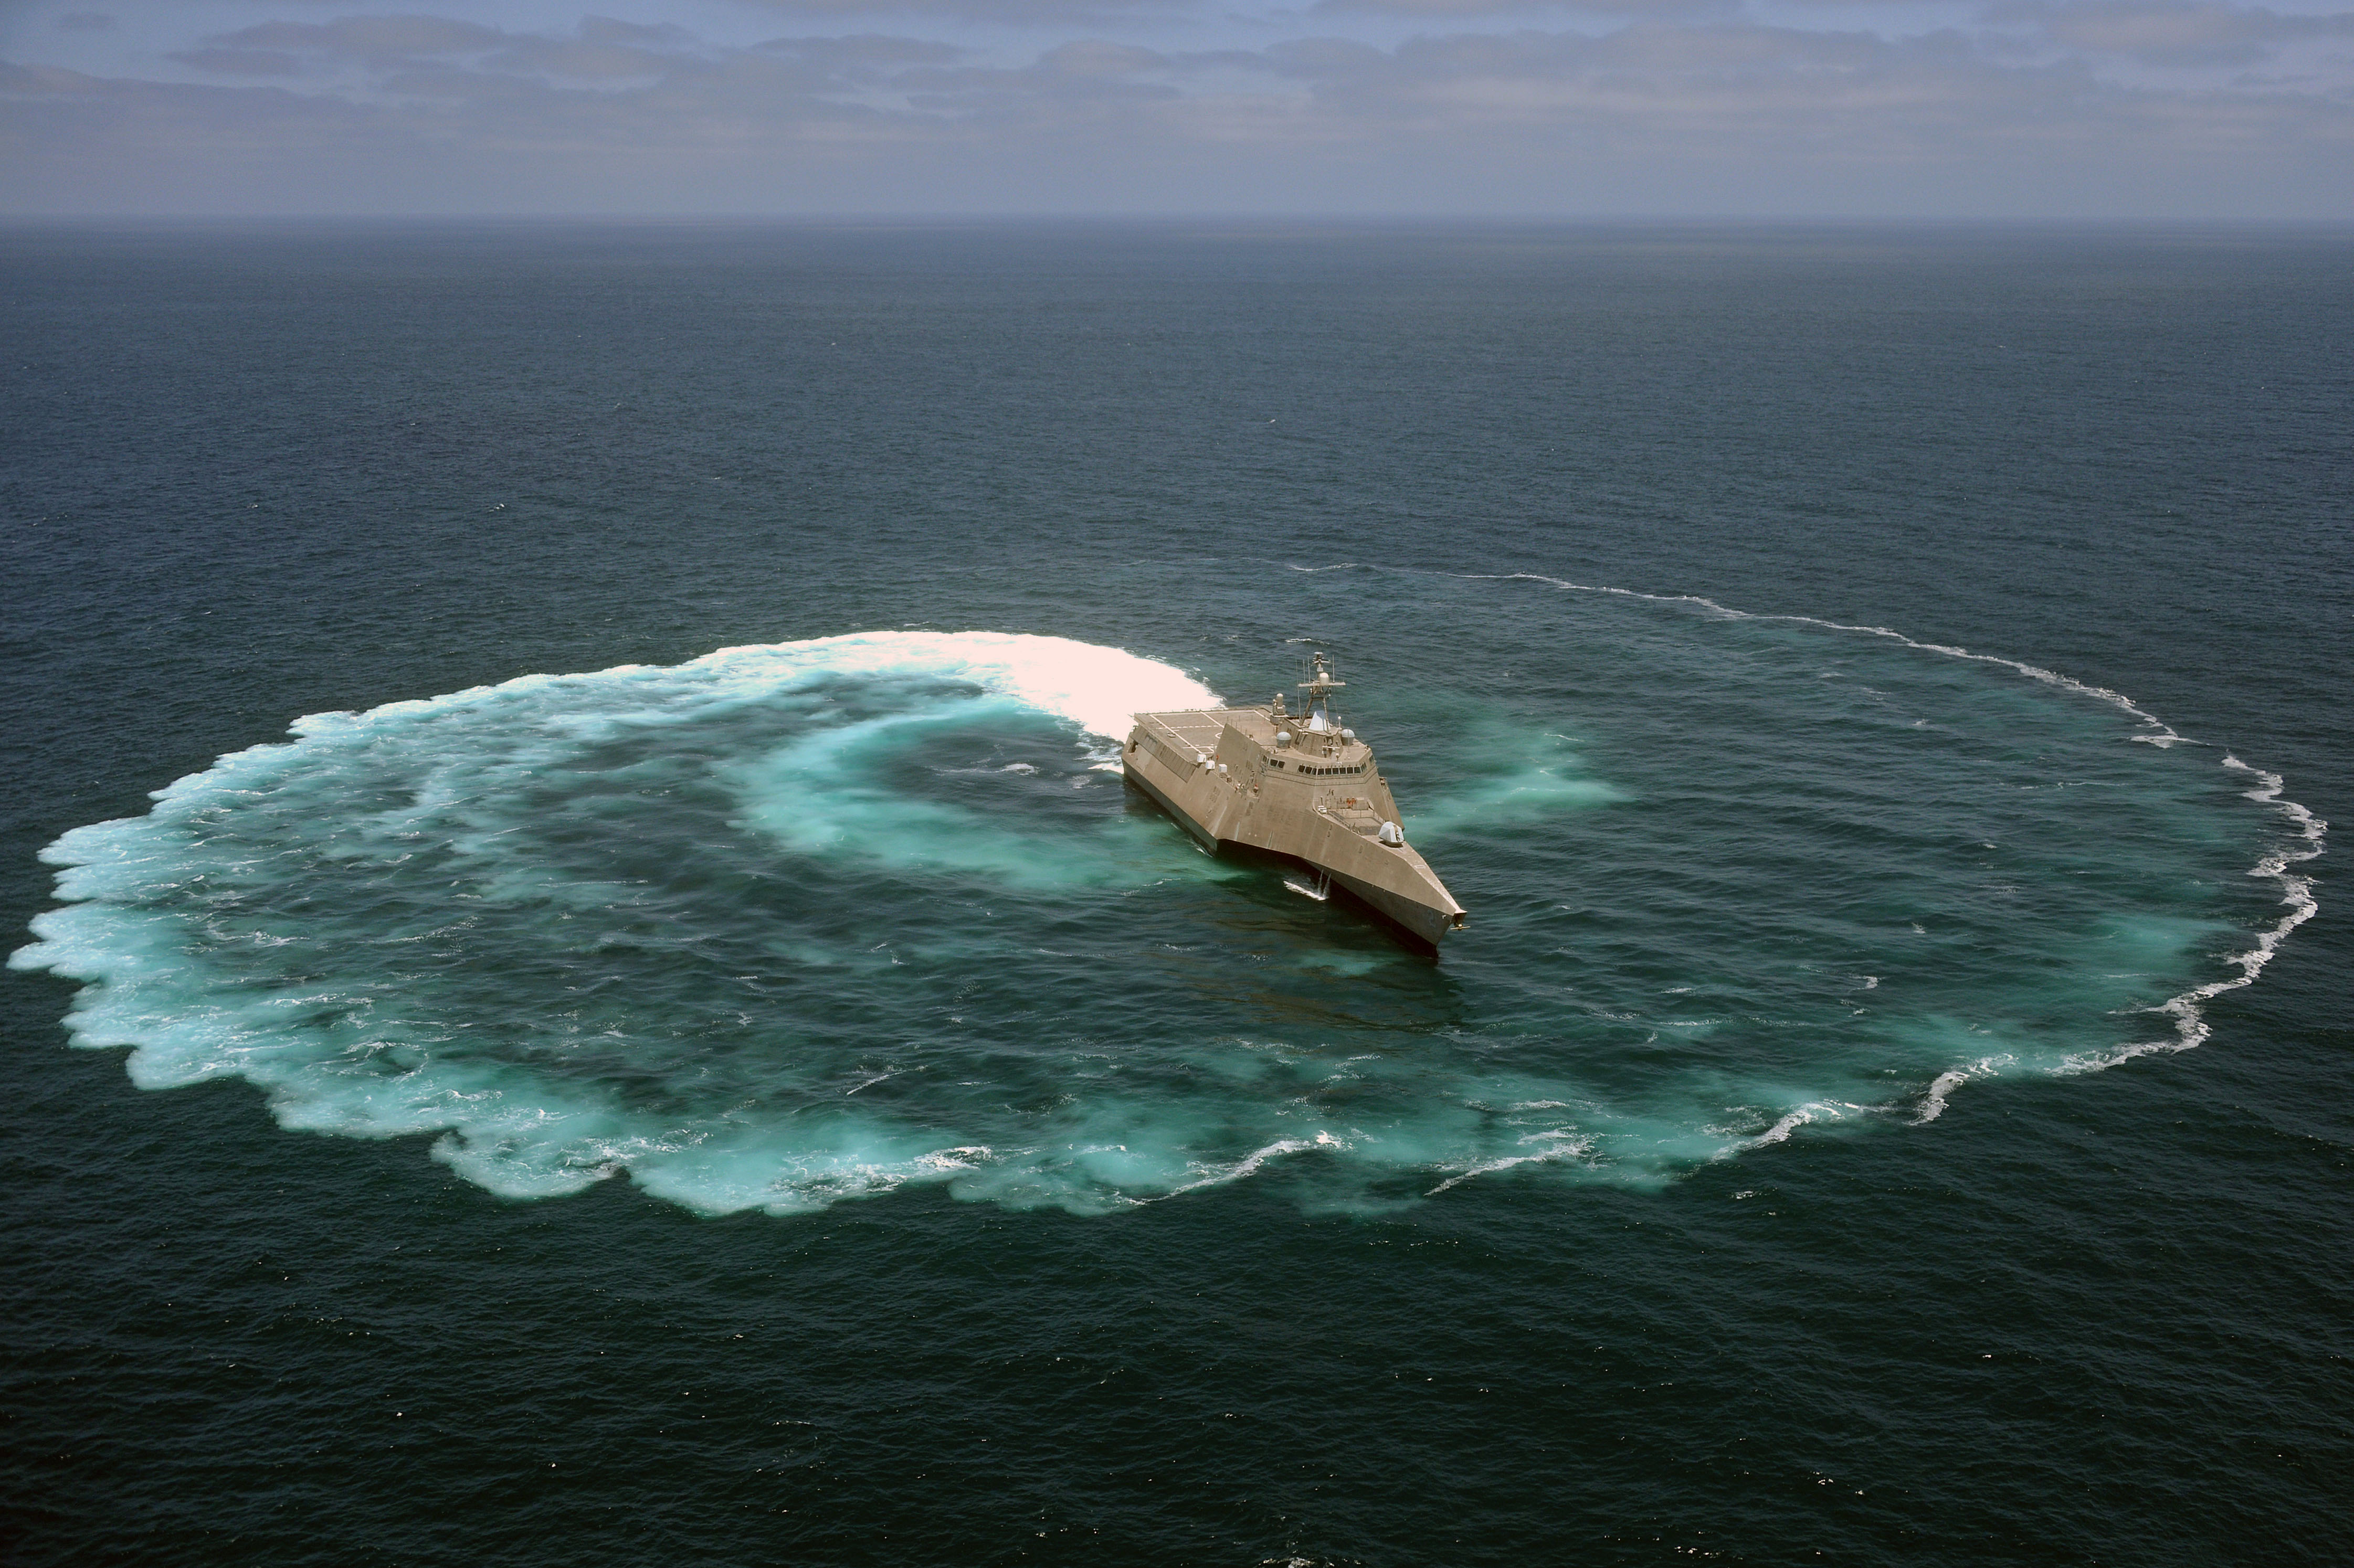 The littoral combat ship USS Independence (LCS 2) demonstrates its maneuvering capabilities in the Pacific Ocean on July 18, 2013. US Navy Photo